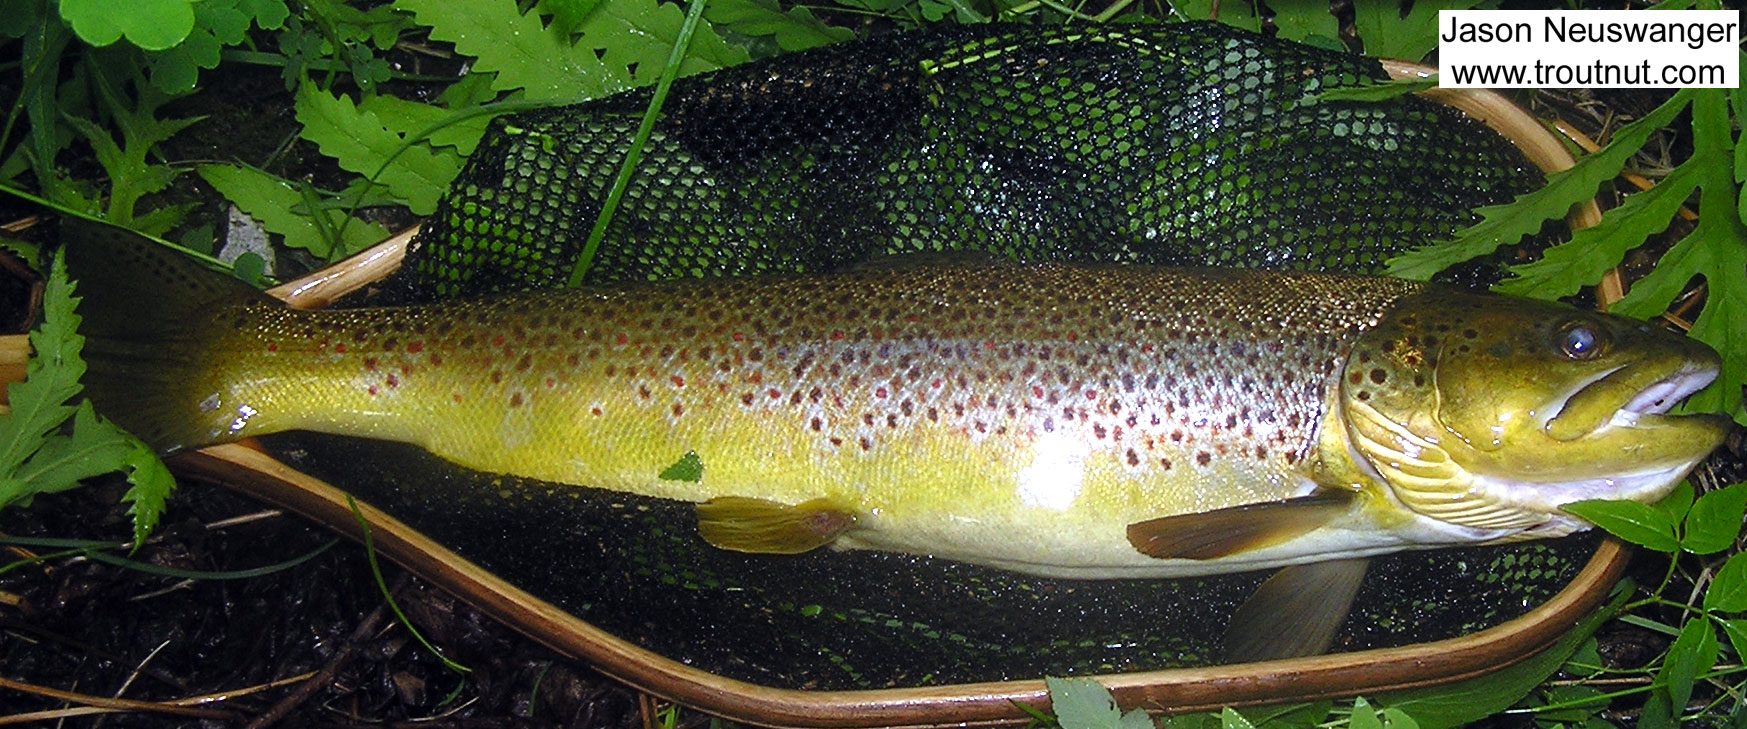 This beautiful 21 inch brown was the first of several nice trout I caught in the best night of Isonychia fishing I've ever had. She smashed a big dry fly off the surface and fought like a nuclear submarine. From the Namekagon River in Wisconsin.